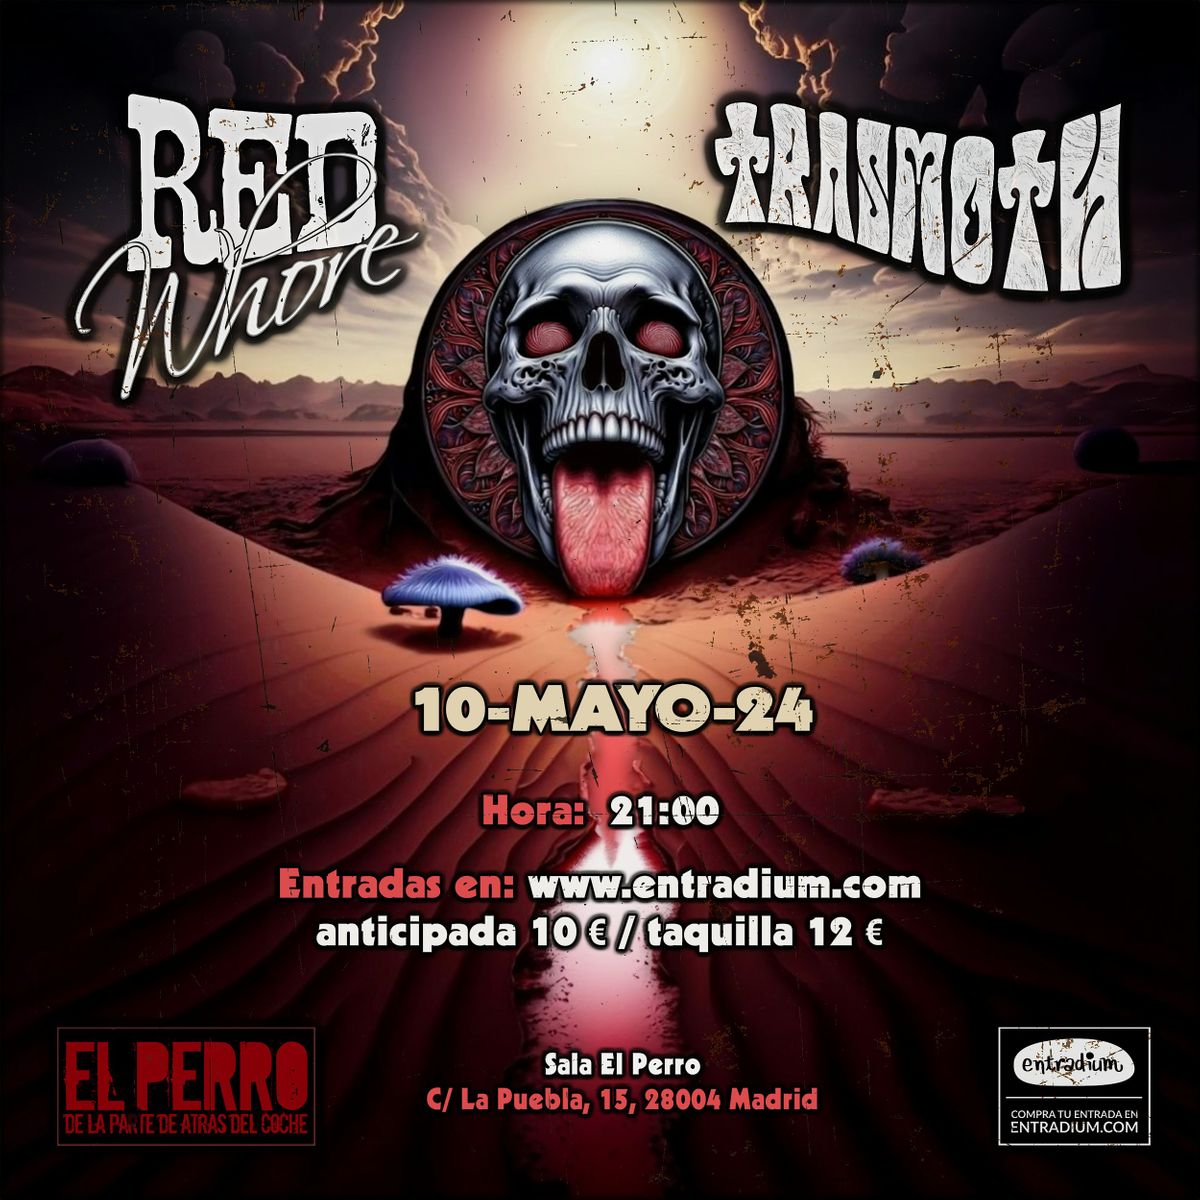 Red Whore + Trasmoth (Madrid)